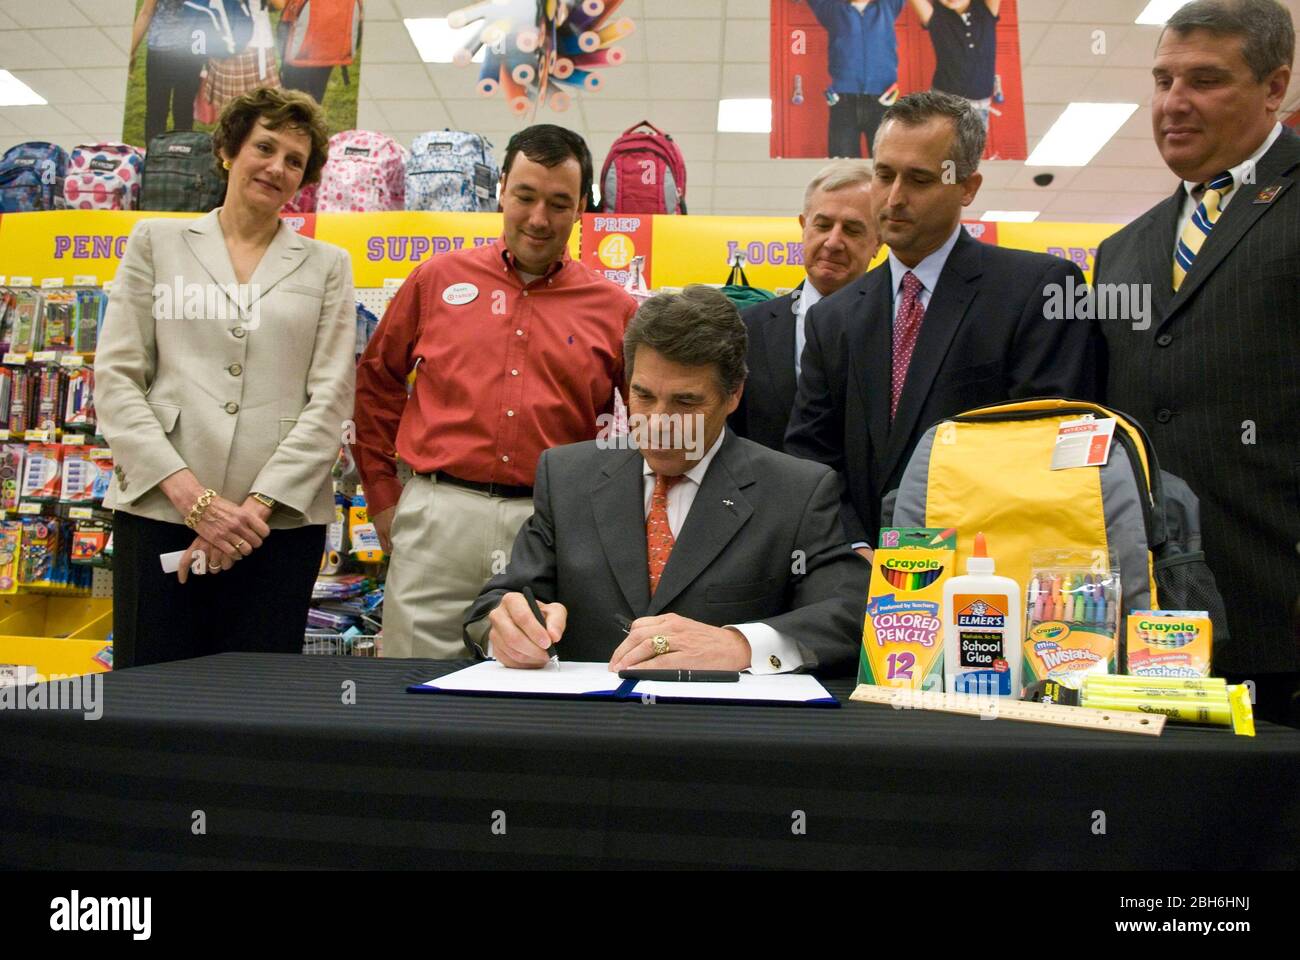 Austin, Texas USA, August 20, 2009. Texas Gov. Rick Perry signs House Bill 1801, which adds school supplies to the list of items exempt from state sales tax during the annual sales tax holiday, at a Target retail store. Texas Comptroller Susan Combs stands on far left. ©Marjorie Kamys Cotera/Daemmrich Photography Stock Photo